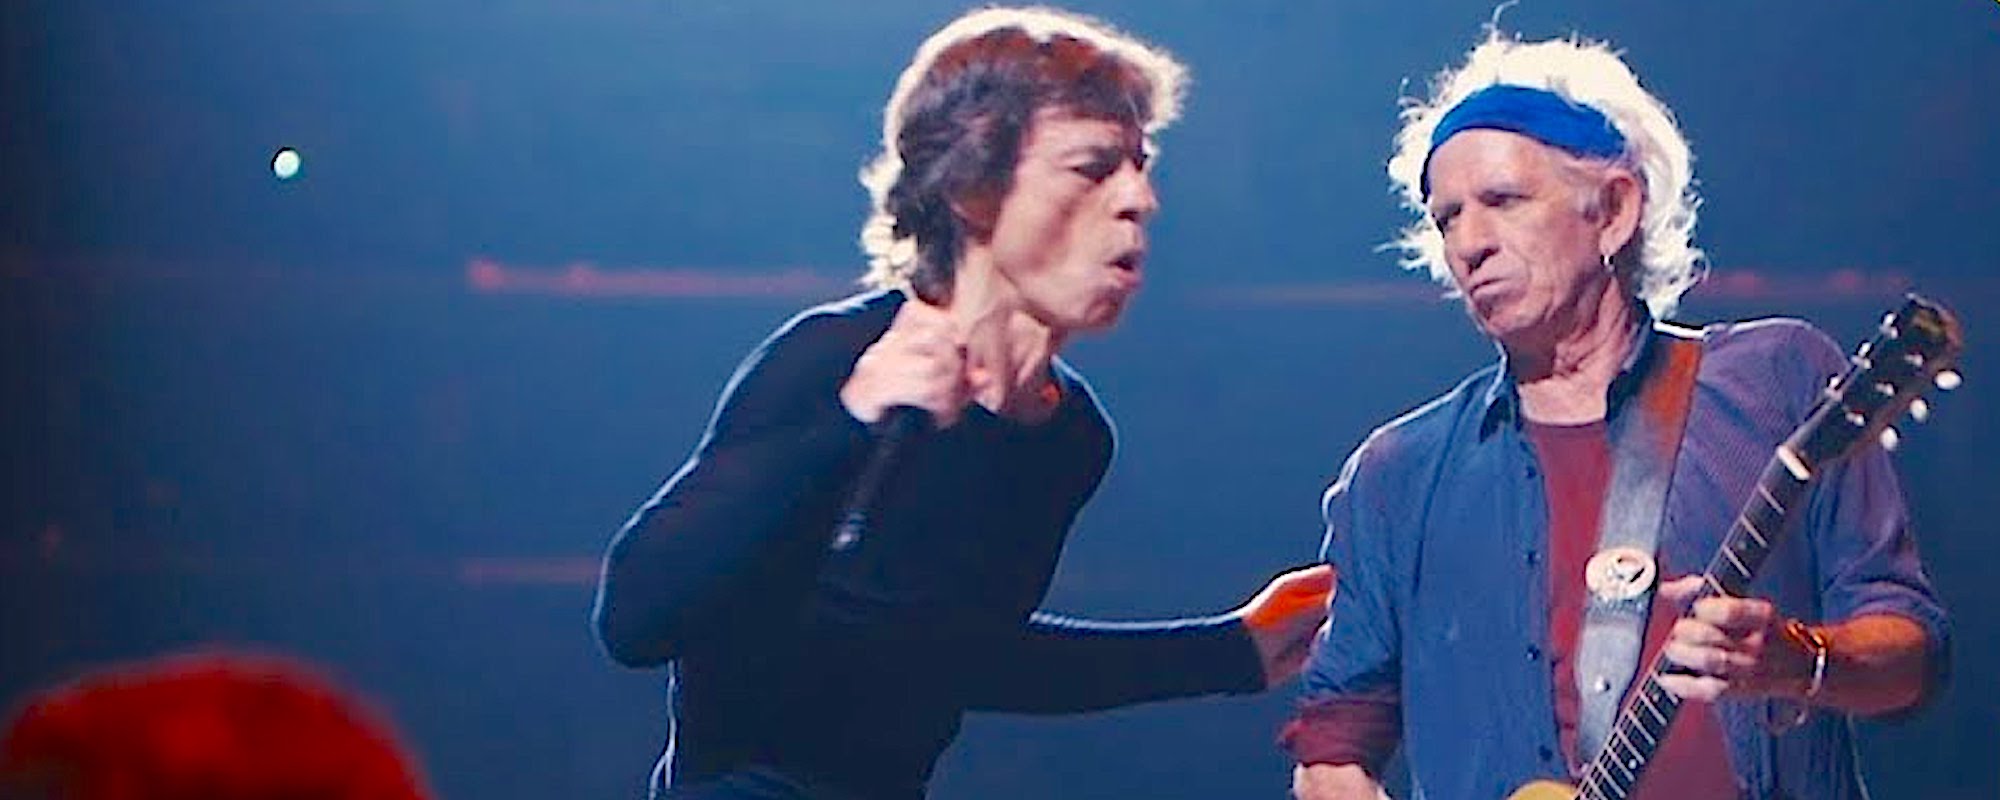 The Rolling Stones Set for 60th Anniversary Tour, Making New Music